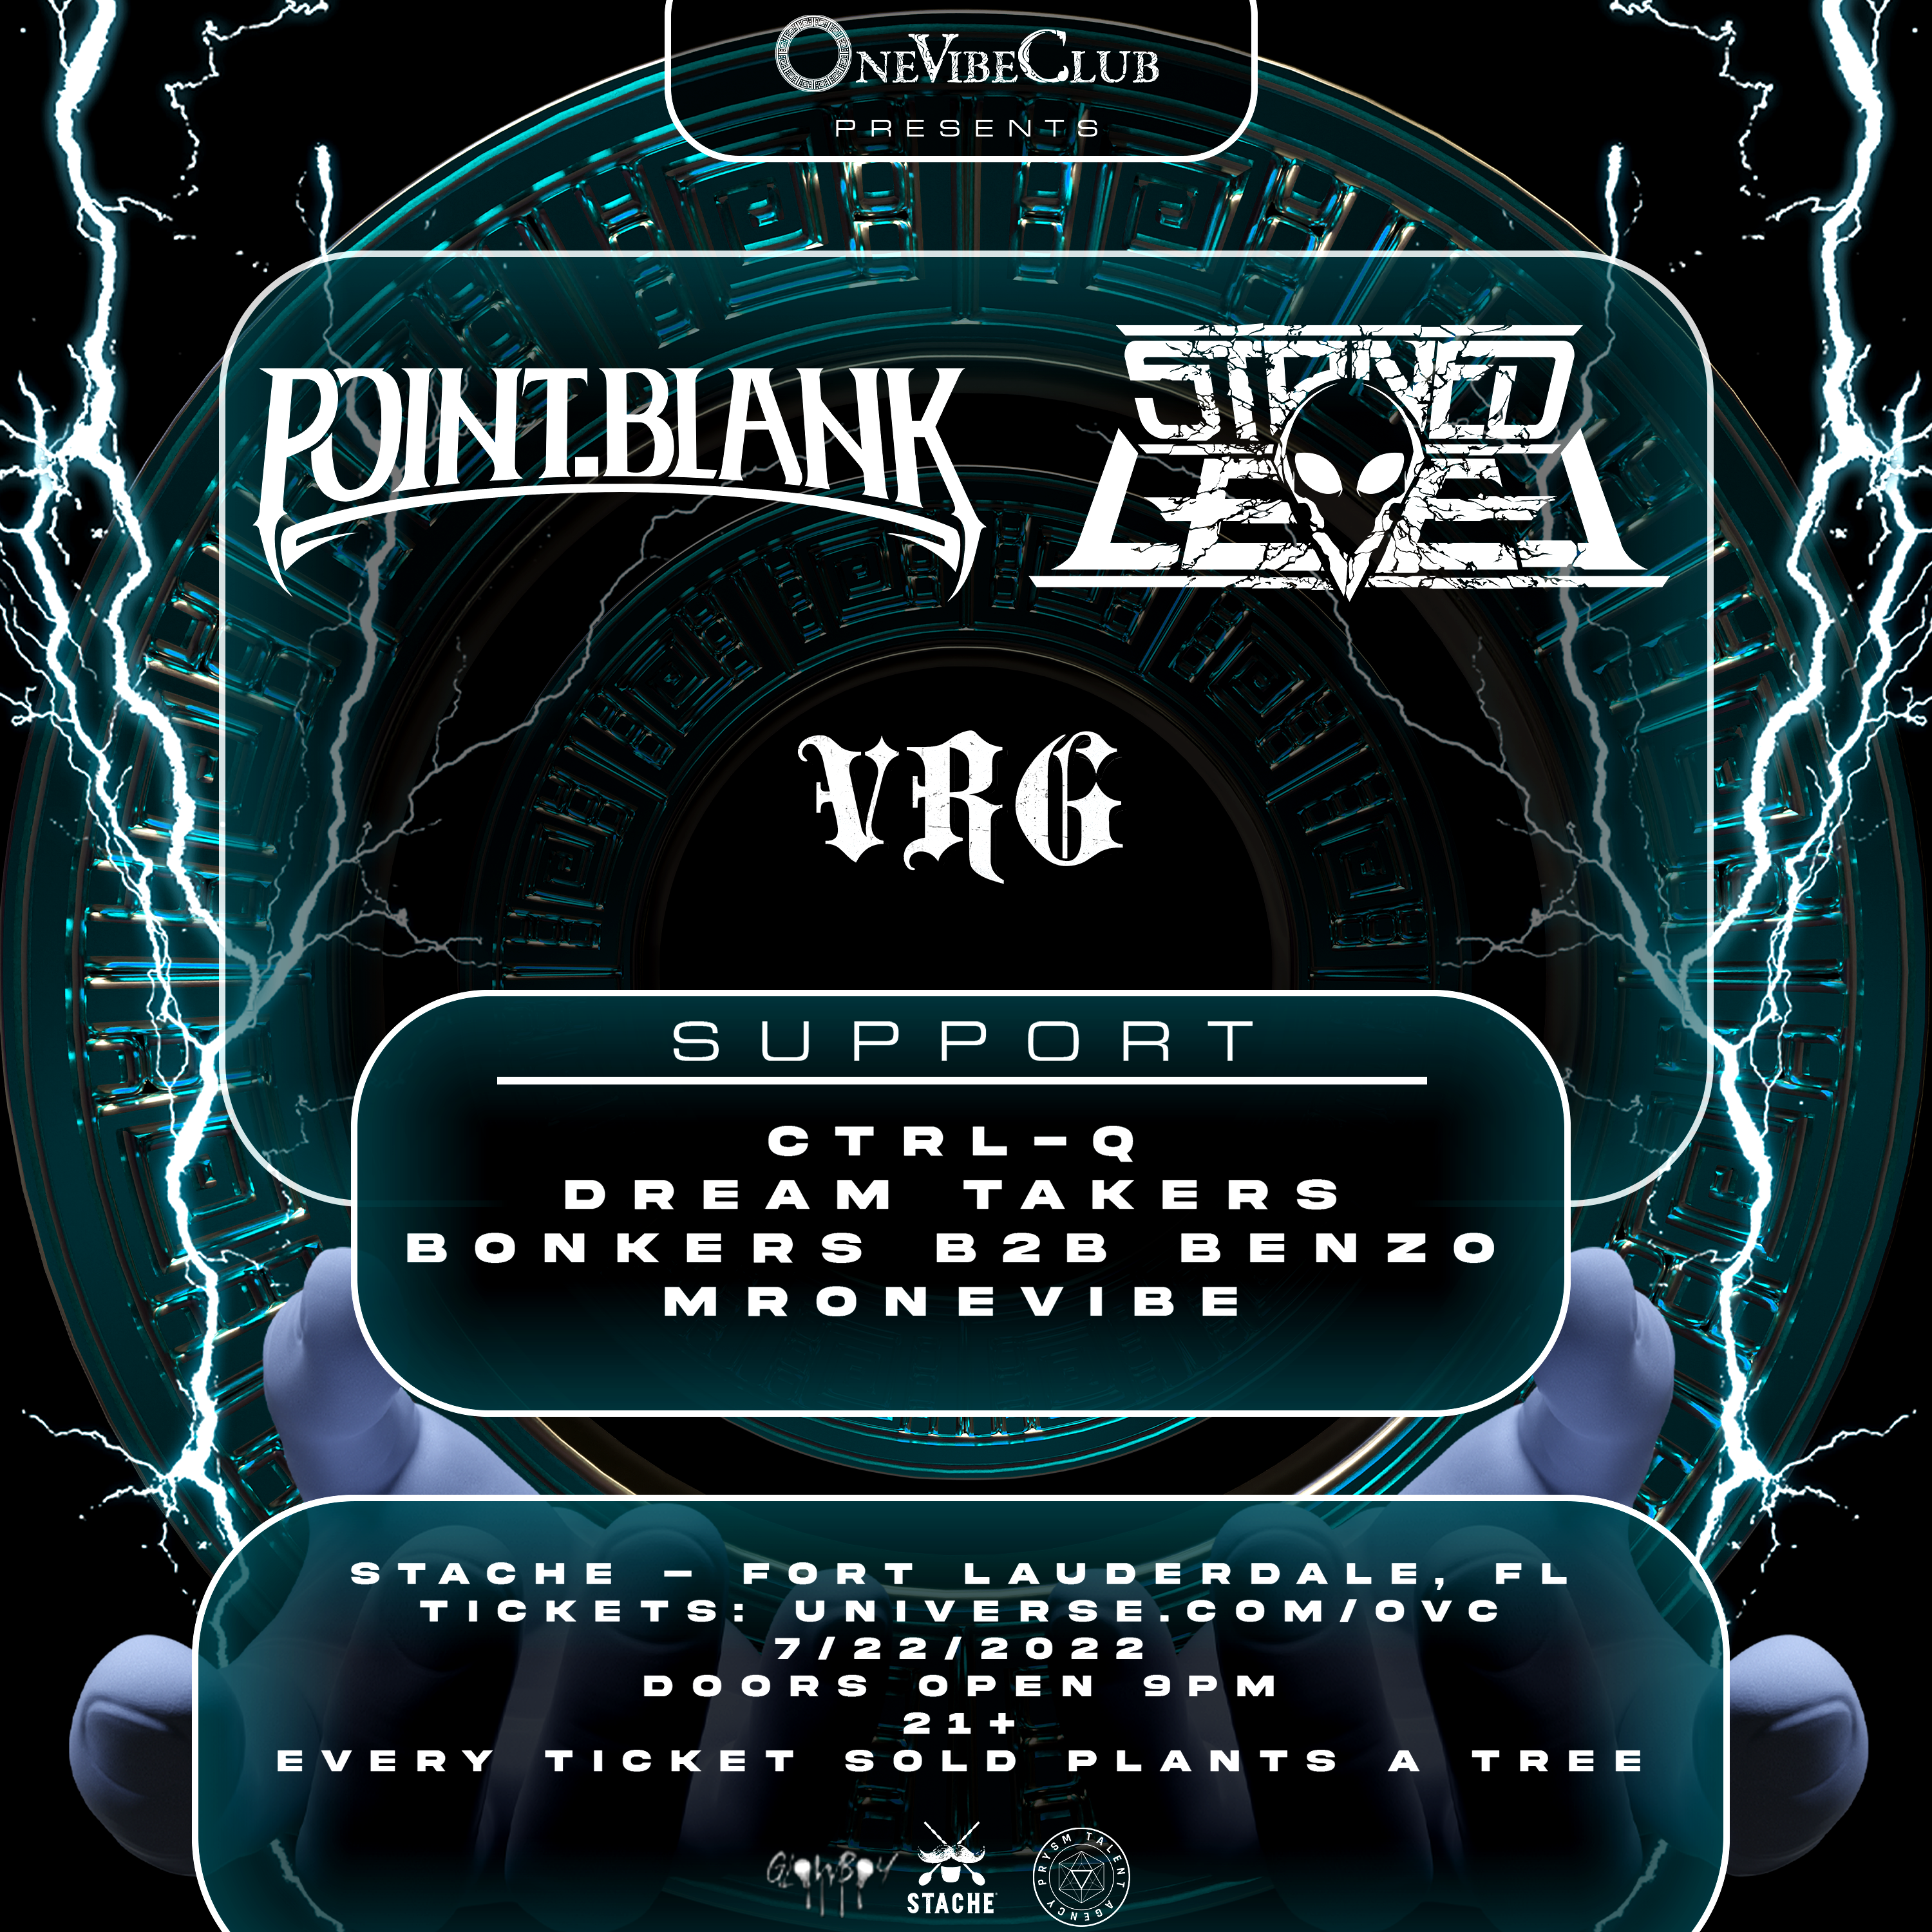 OneVibeClub Presents: Point.Blank, Stoned Level, and VRG